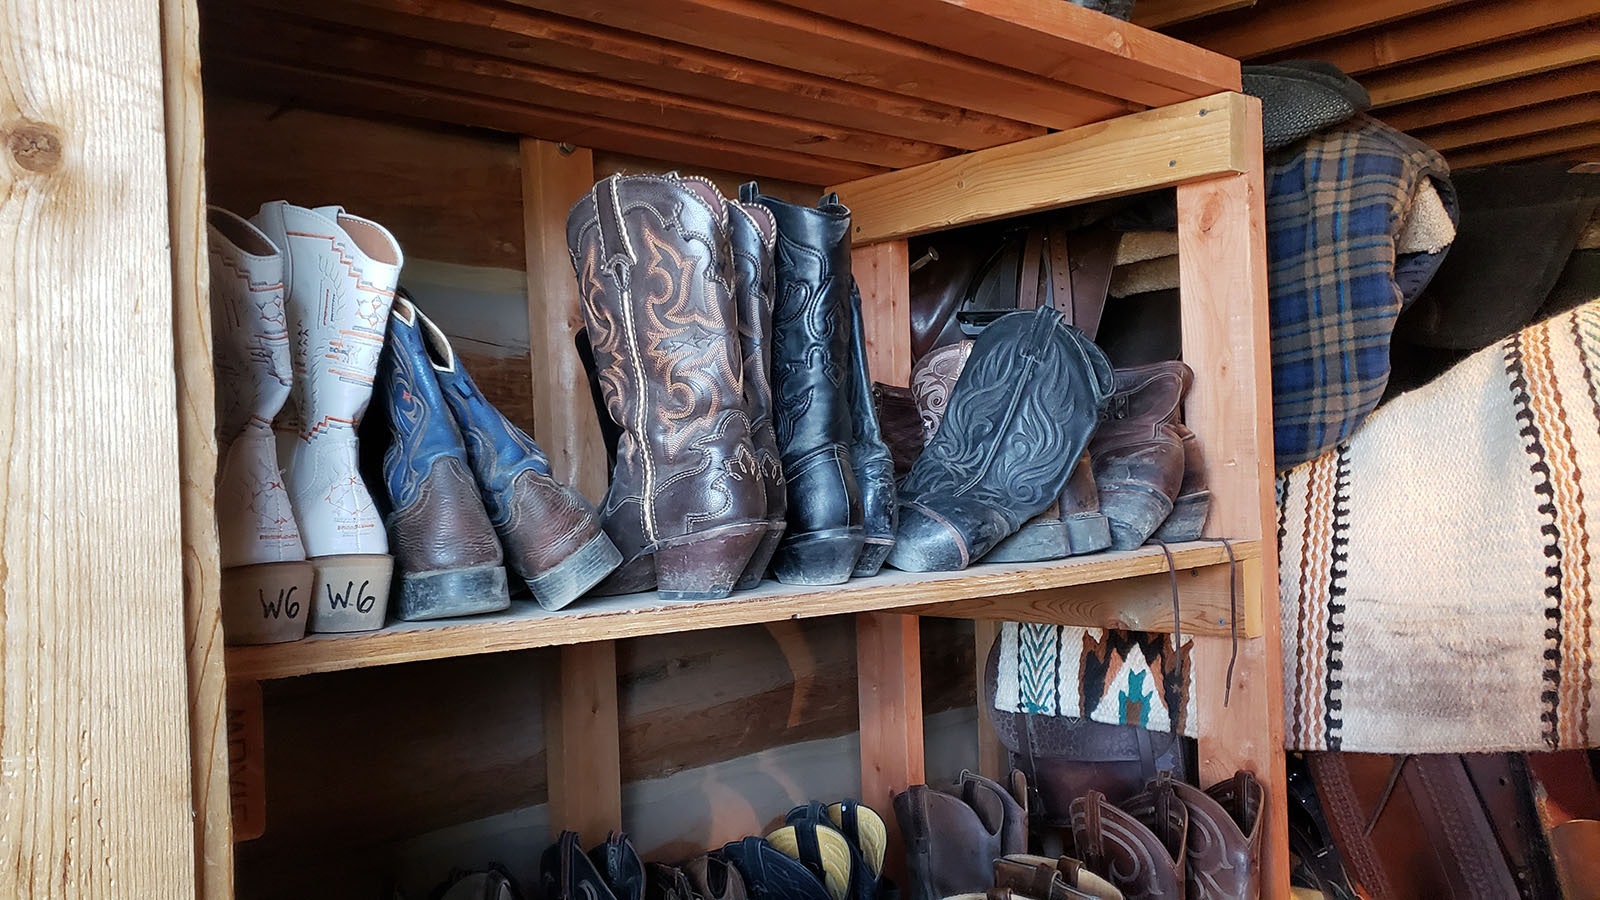 Those who sign up for riding and lack cowboy boots have a selection of boots in all sizes to choose from.